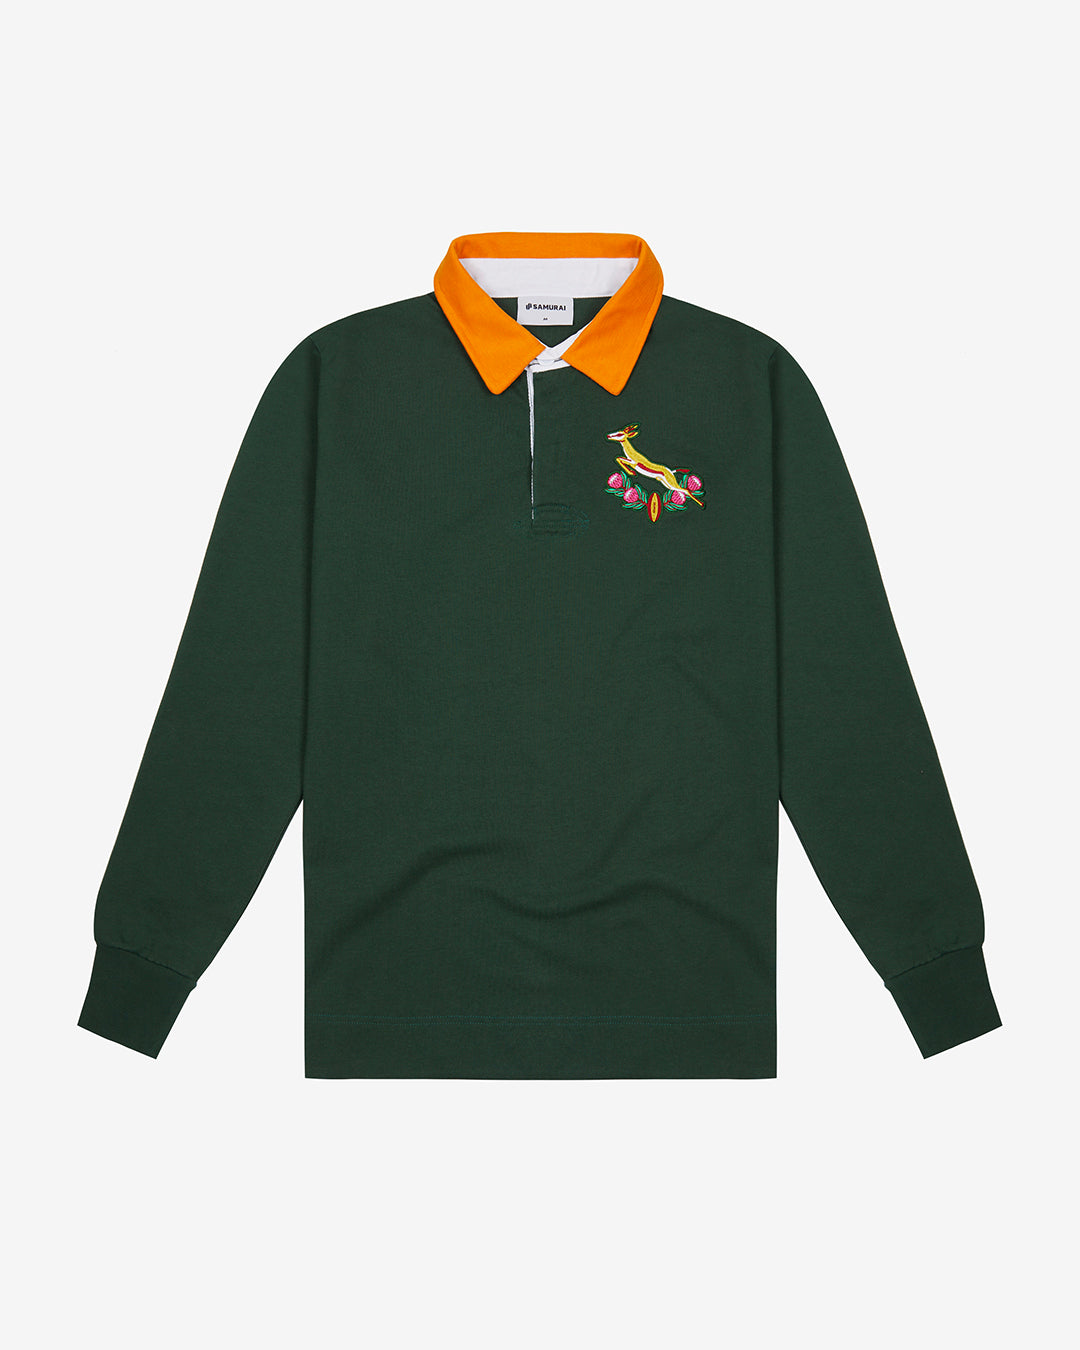 VC: ZAF - Women's Vintage Rugby Shirt - South Africa